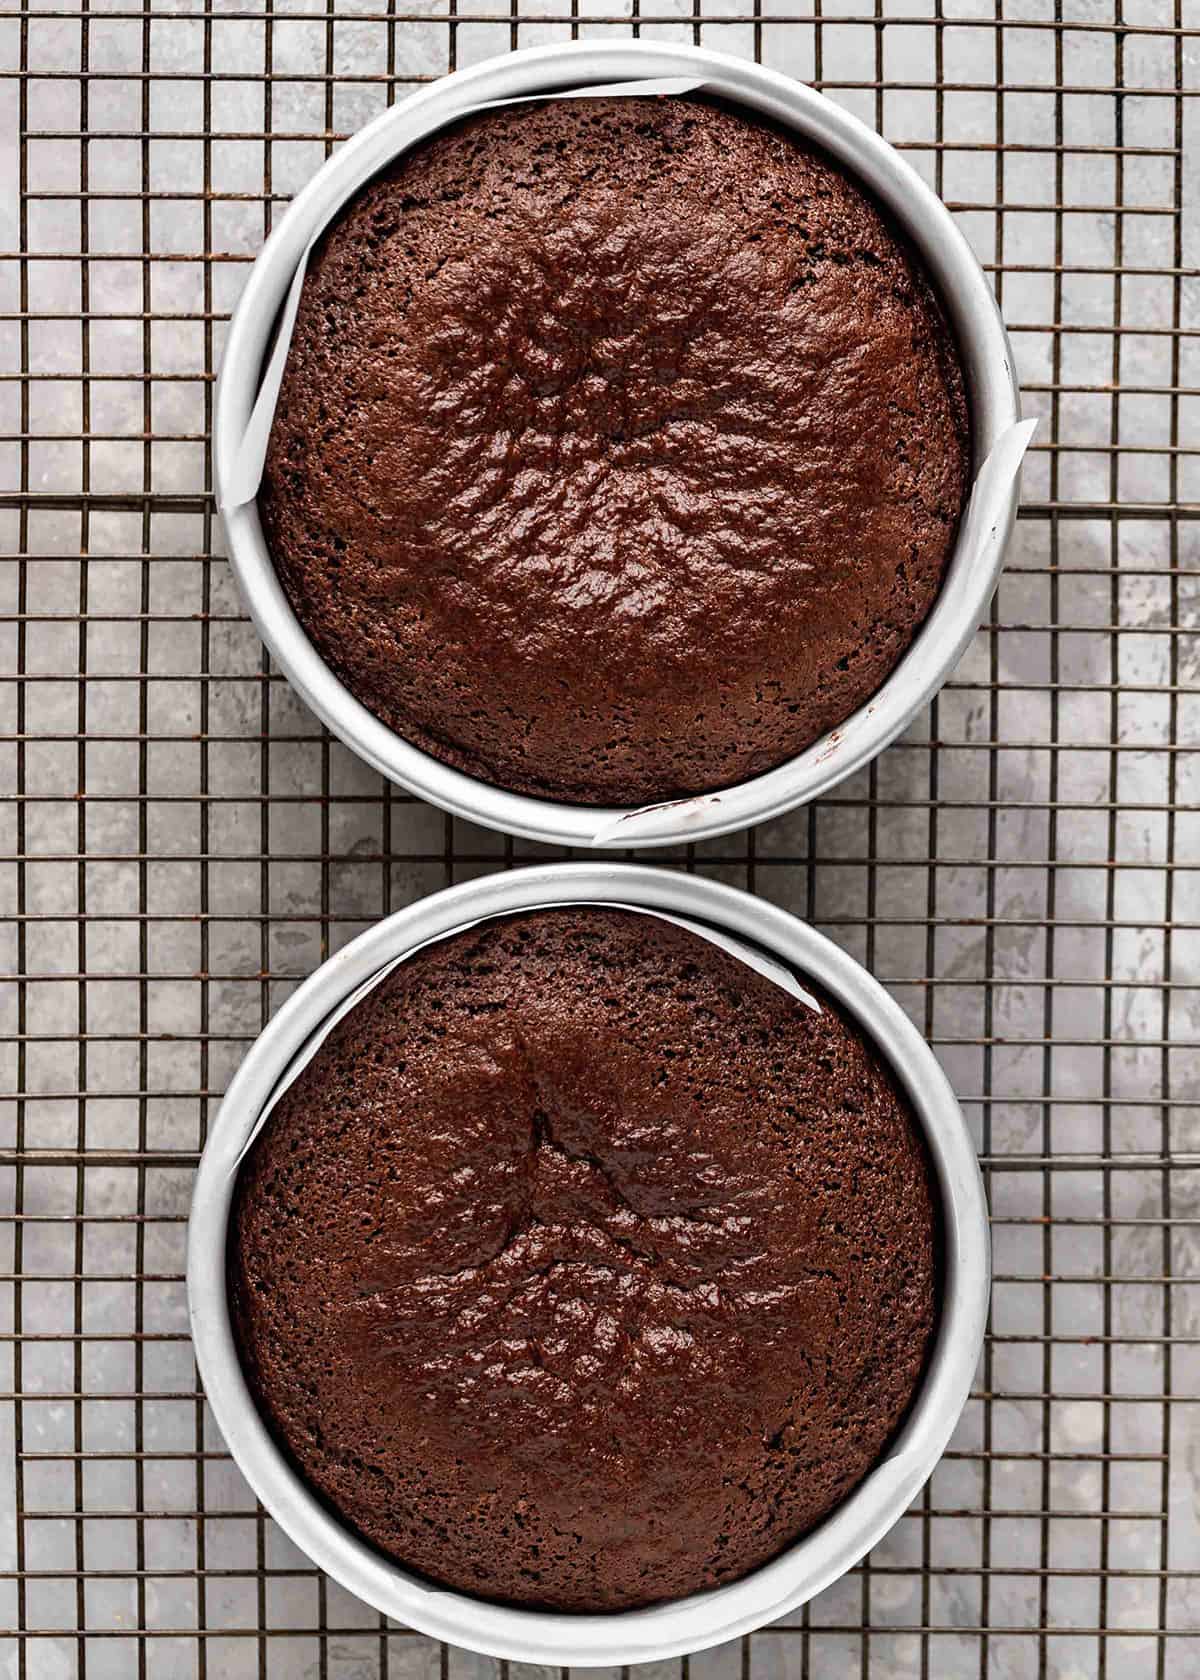 chocolate cake baked in two 6" round cake pans on a wire cooling rack